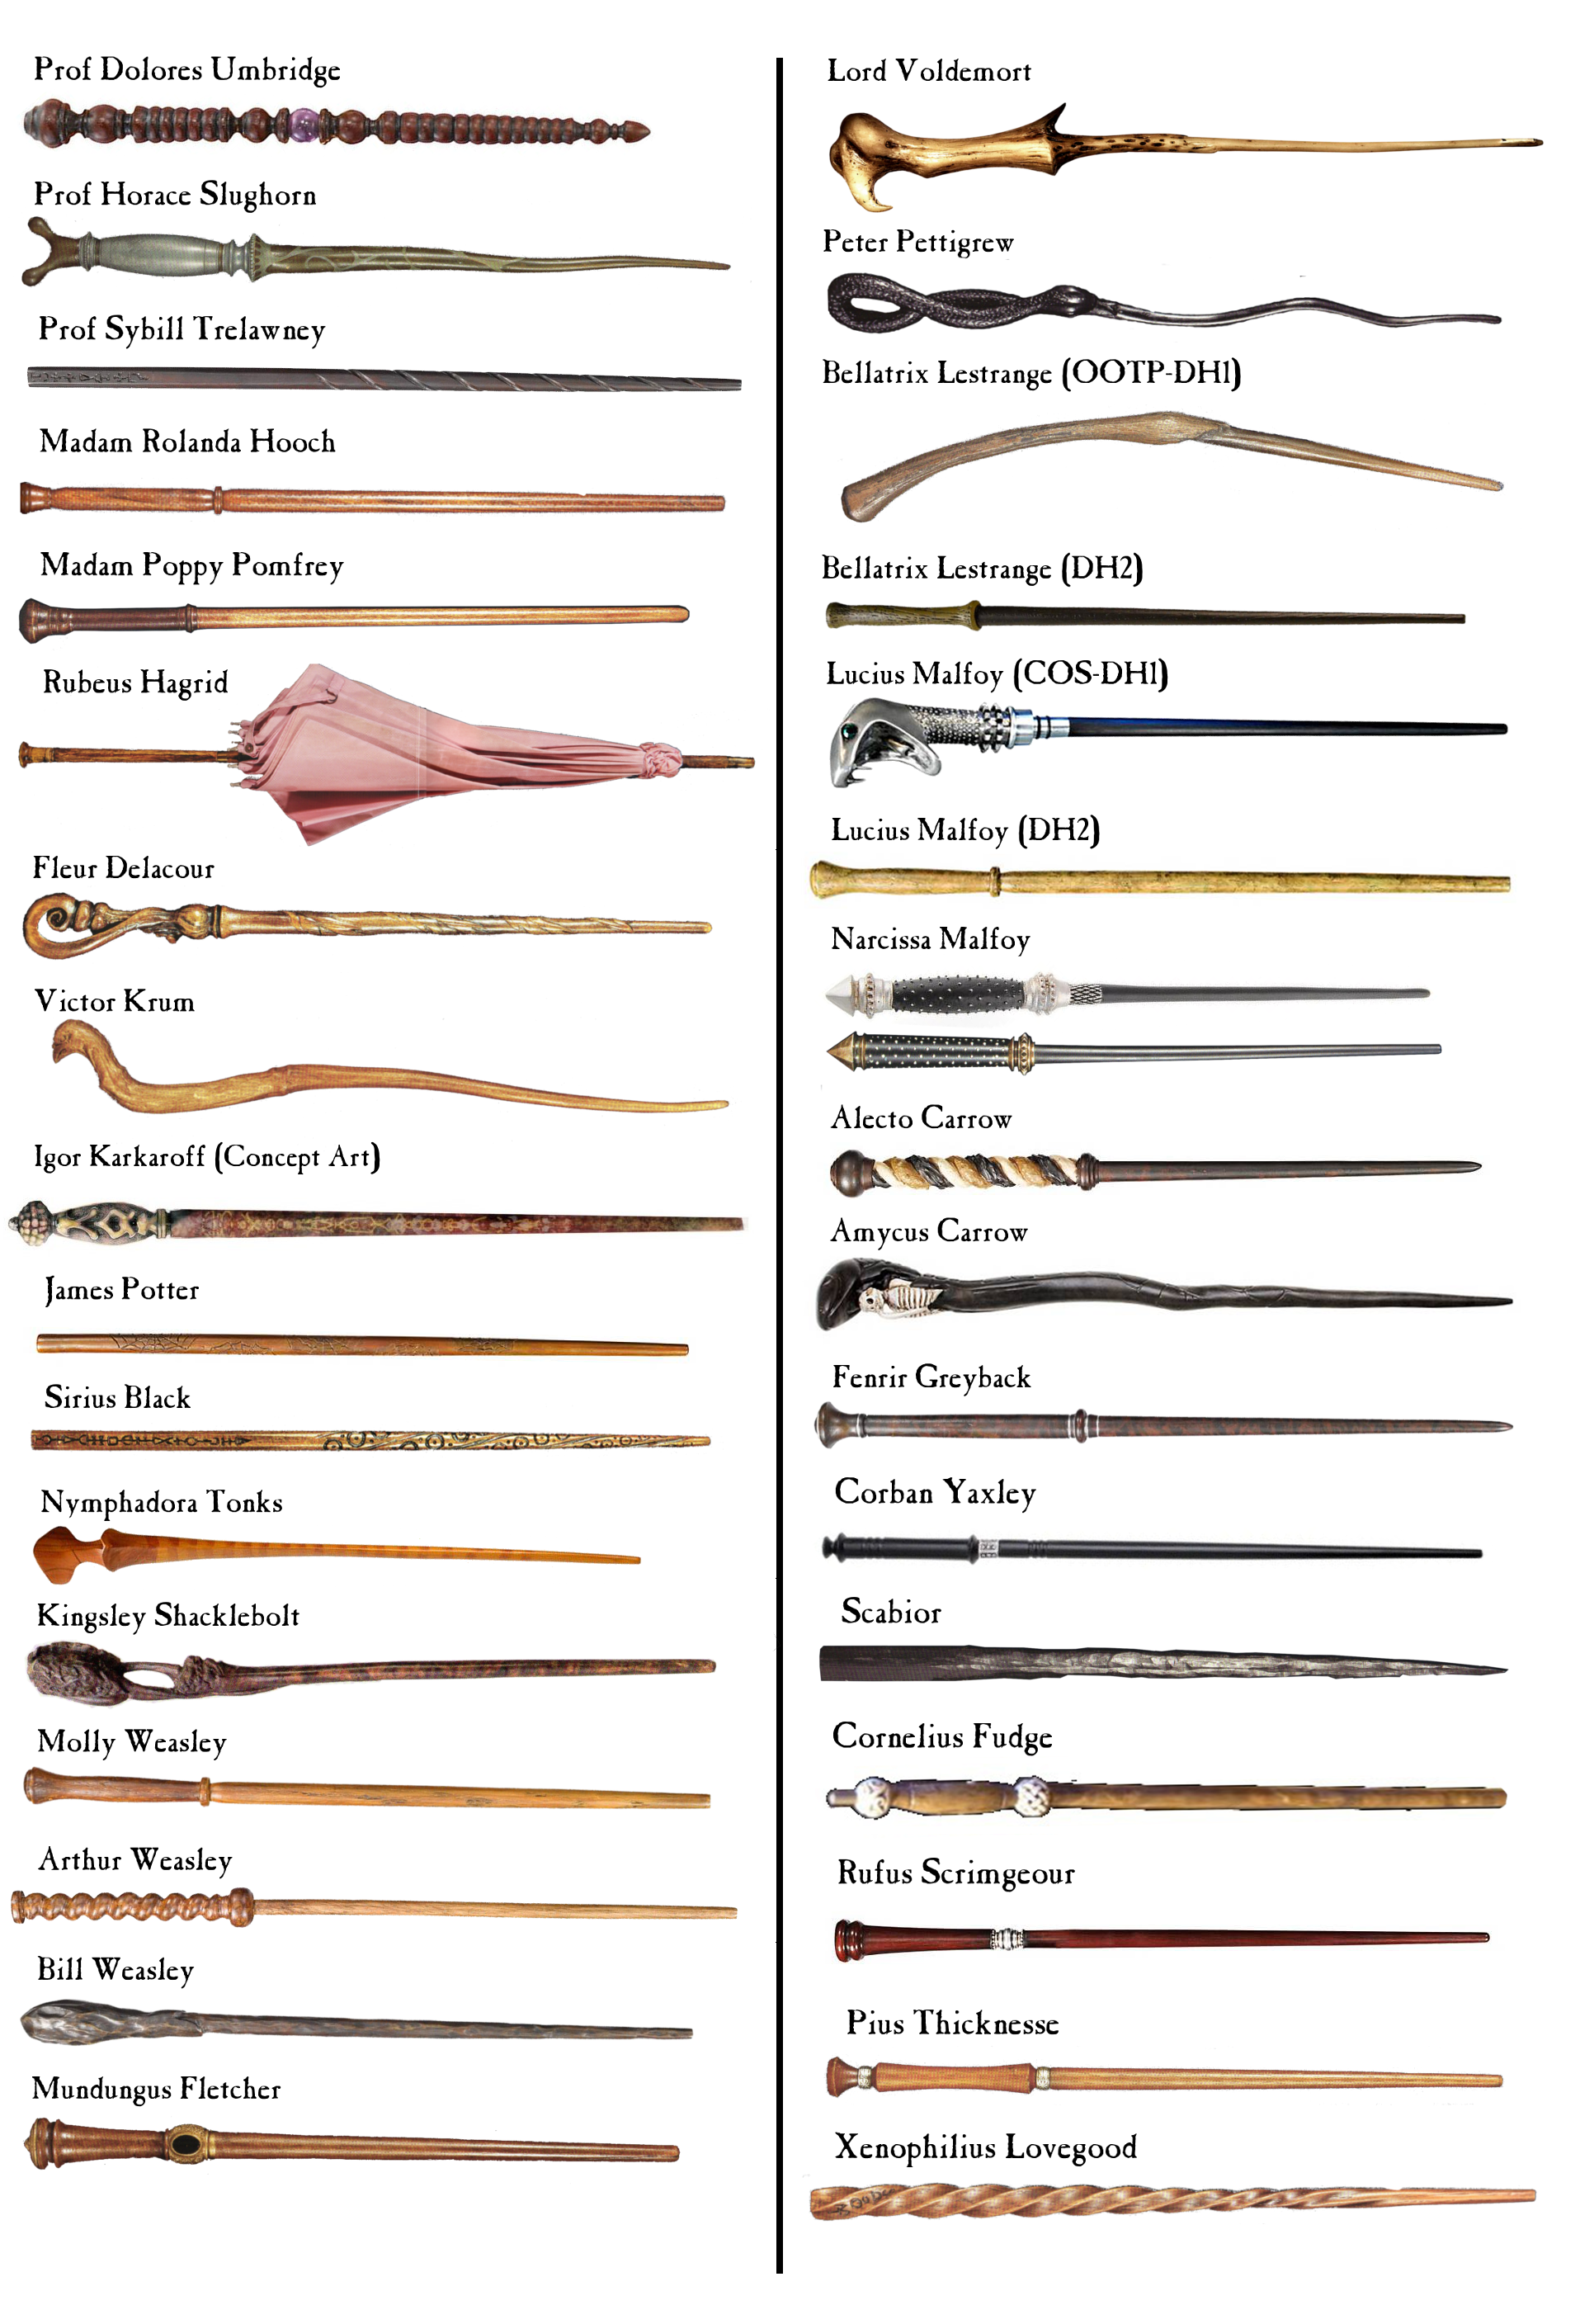 Harry Potter wands | RPF Costume and Prop Maker Community